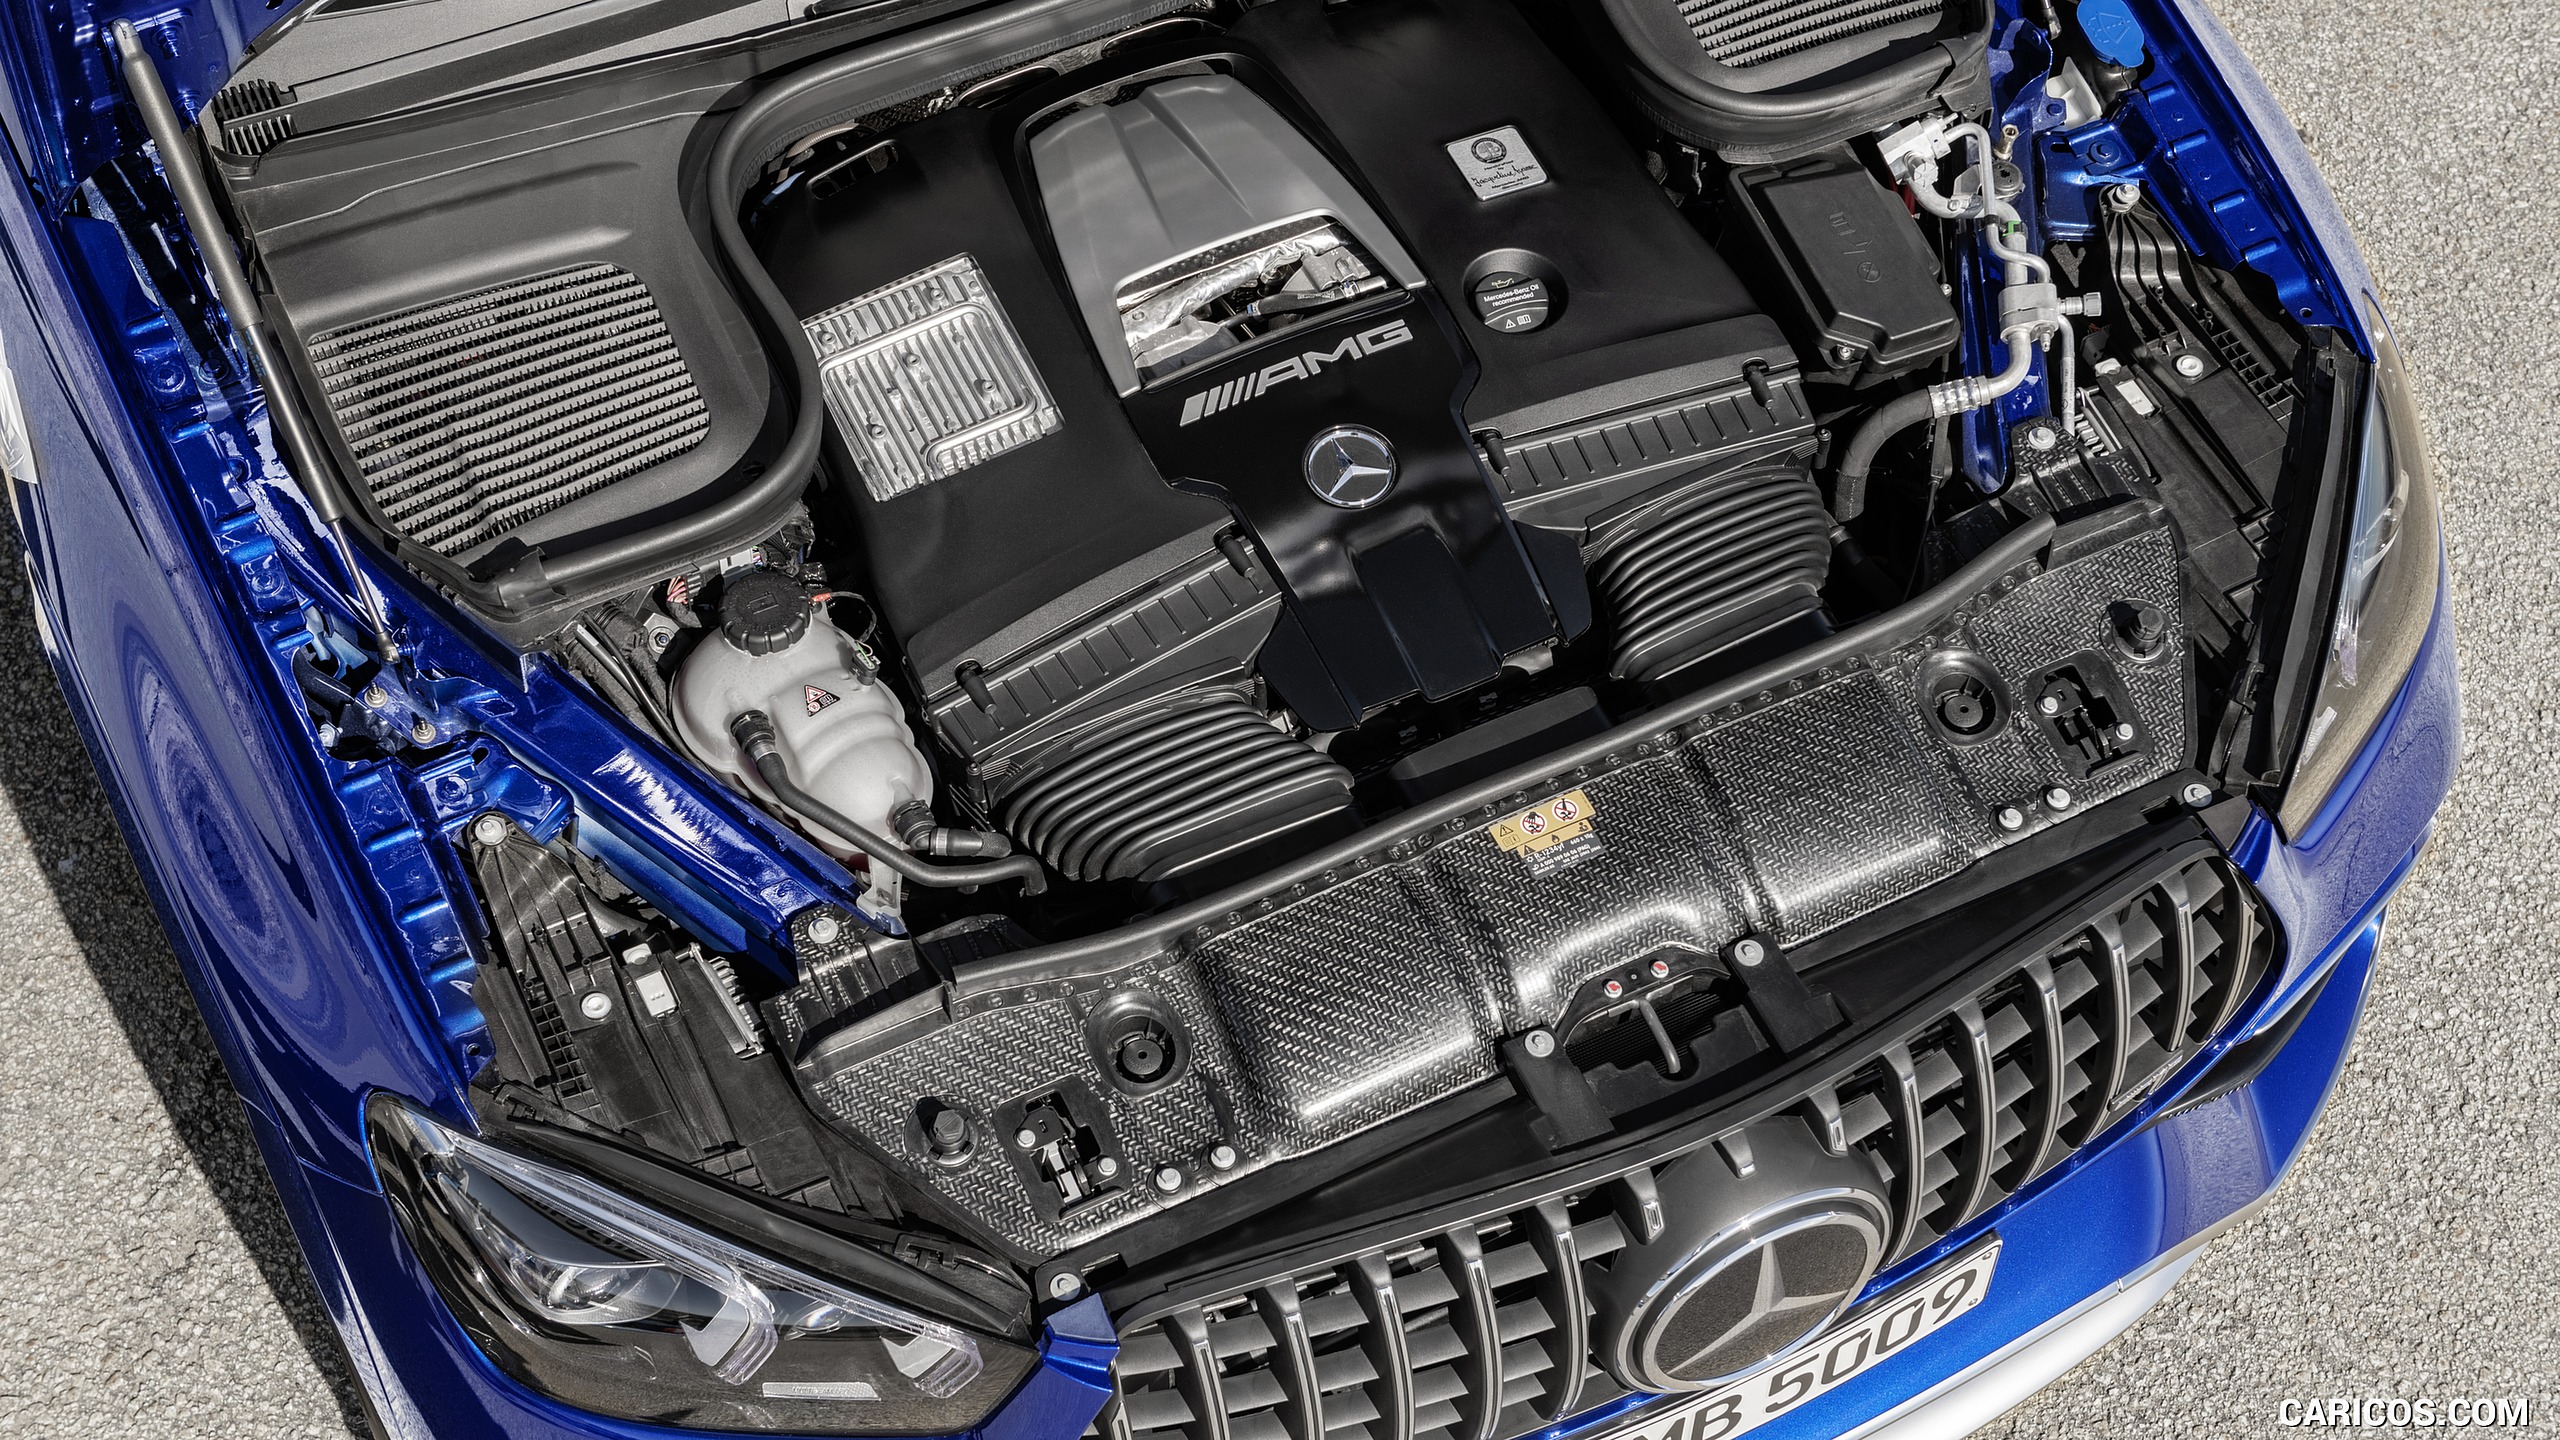 2021 Mercedes-AMG GLE 63 S 4MATIC - Engine, #25 of 187